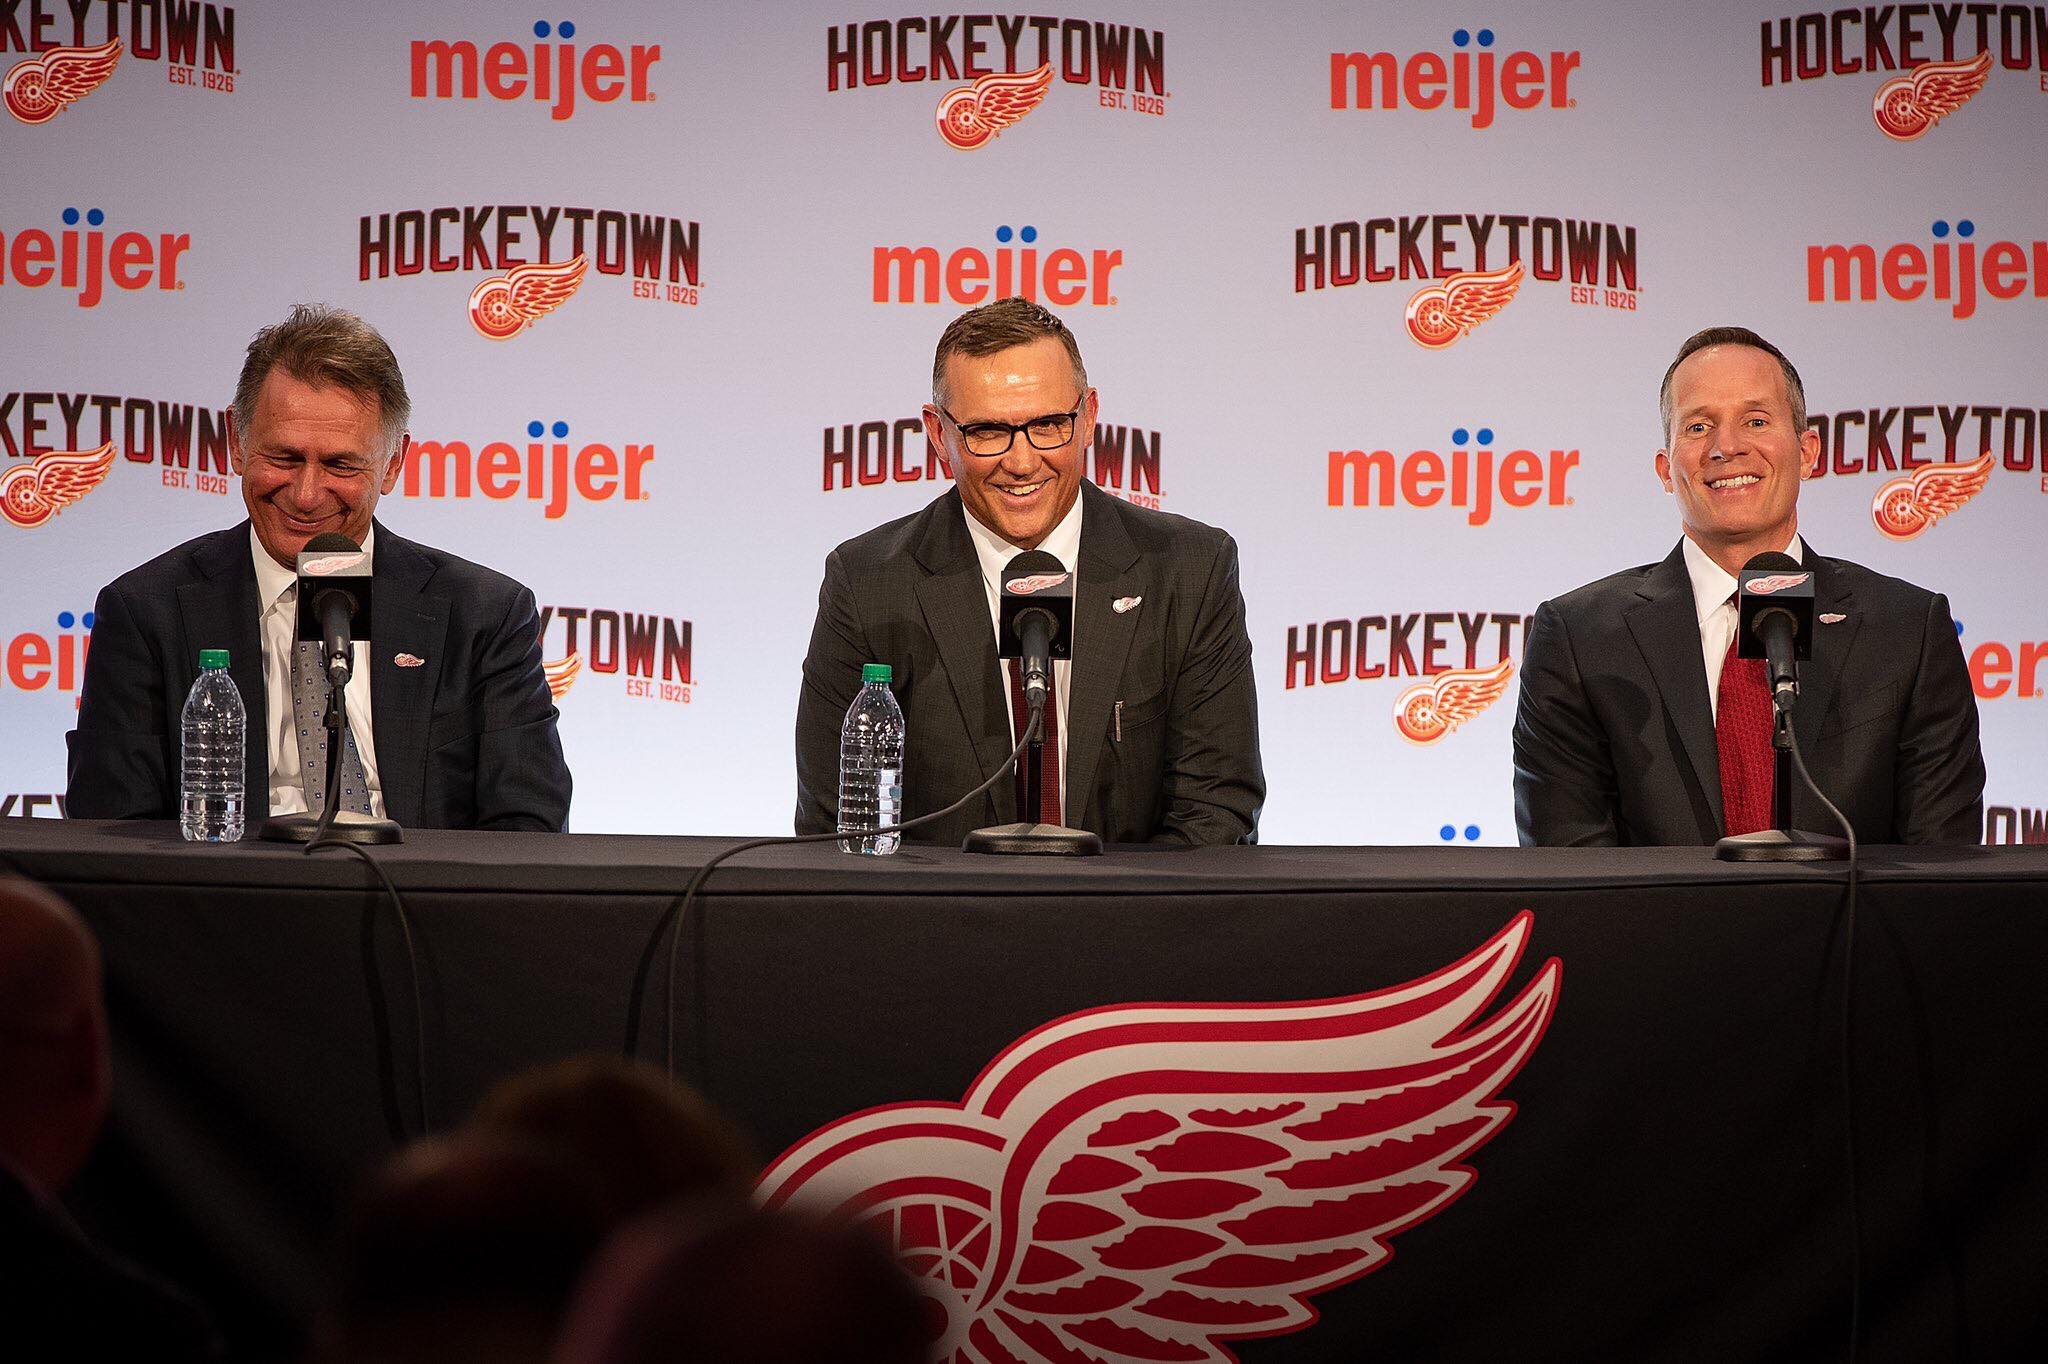 The Captain's back! Steve Yzerman comes full-circle as Red Wings' new GM